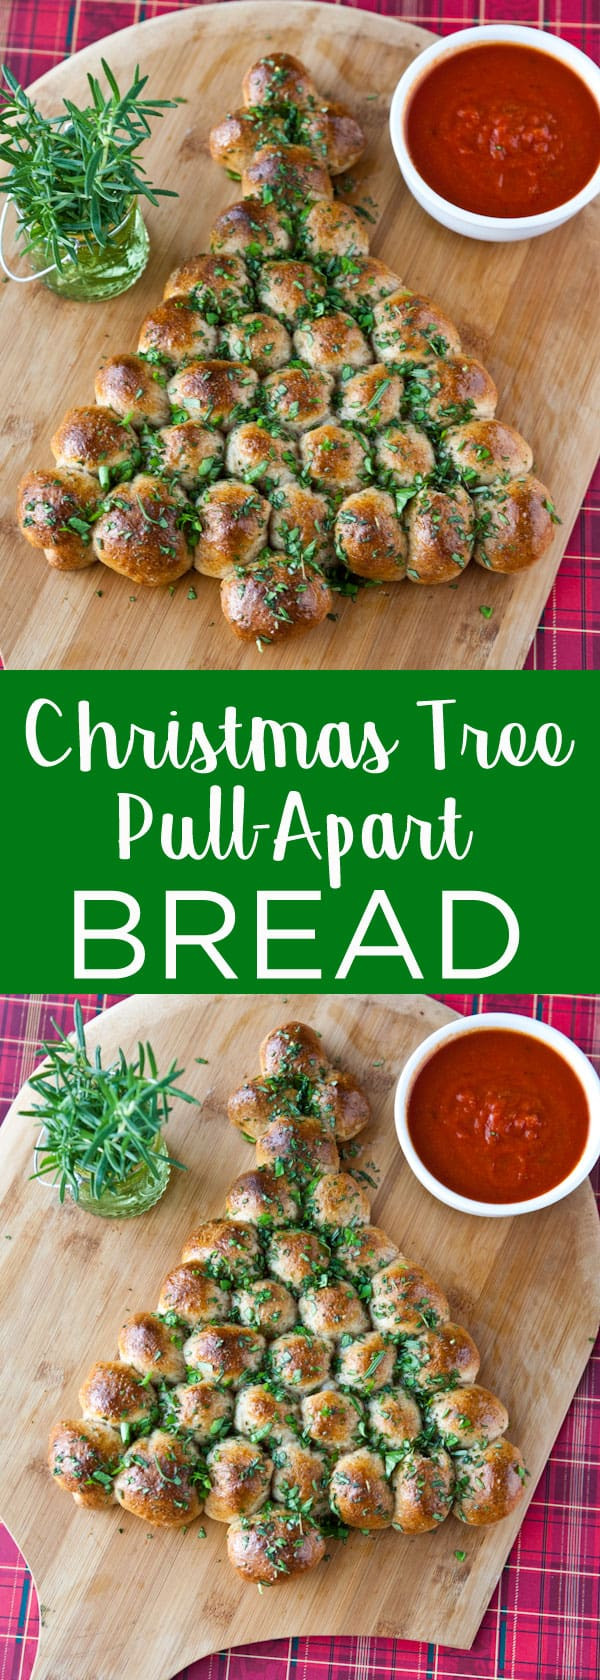 Christmas Tree Pull Apart Bread
 Eclectic Recipes Christmas Tree Pull Apart